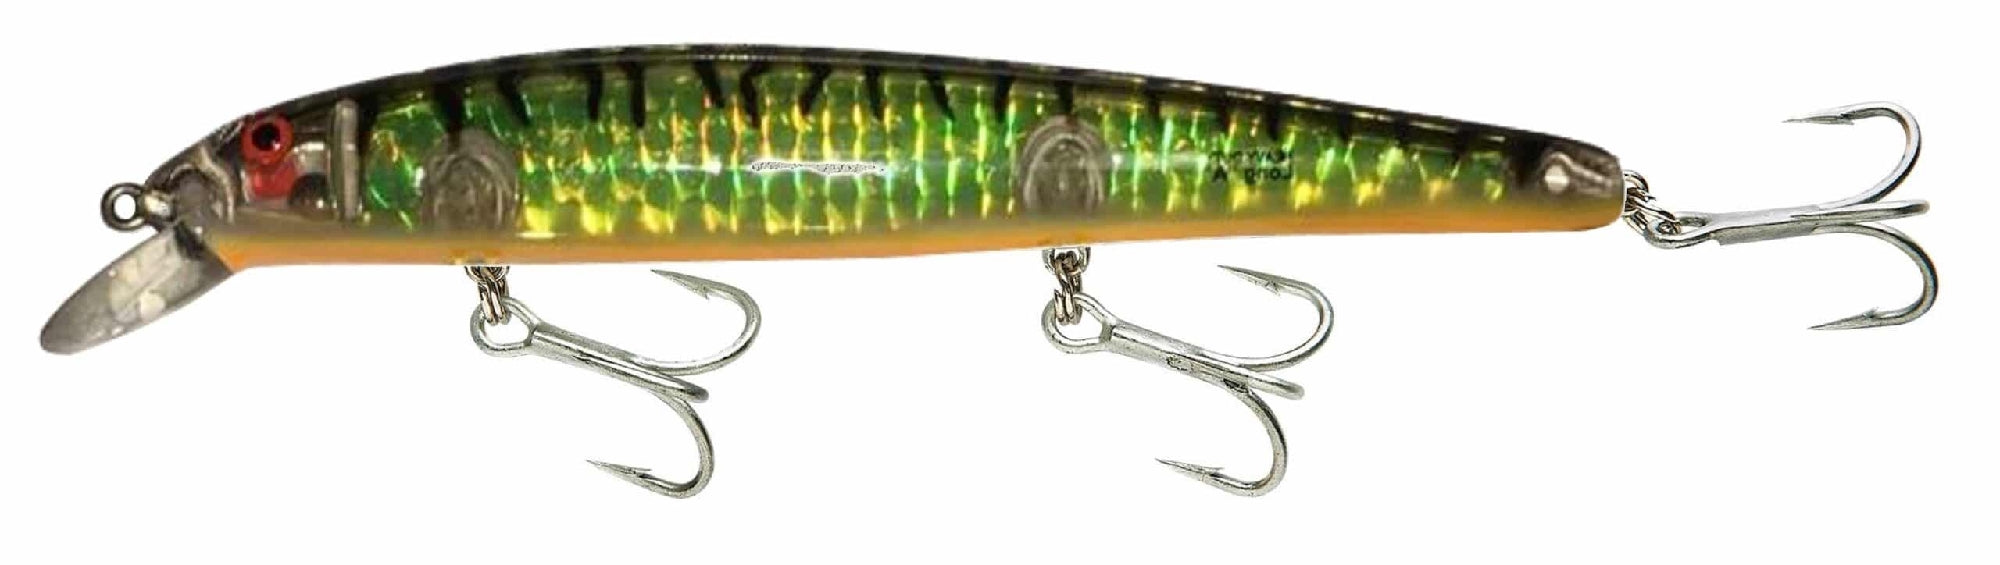 Bomber Long A Saltwater - 17a — Fishing & Outdoor World